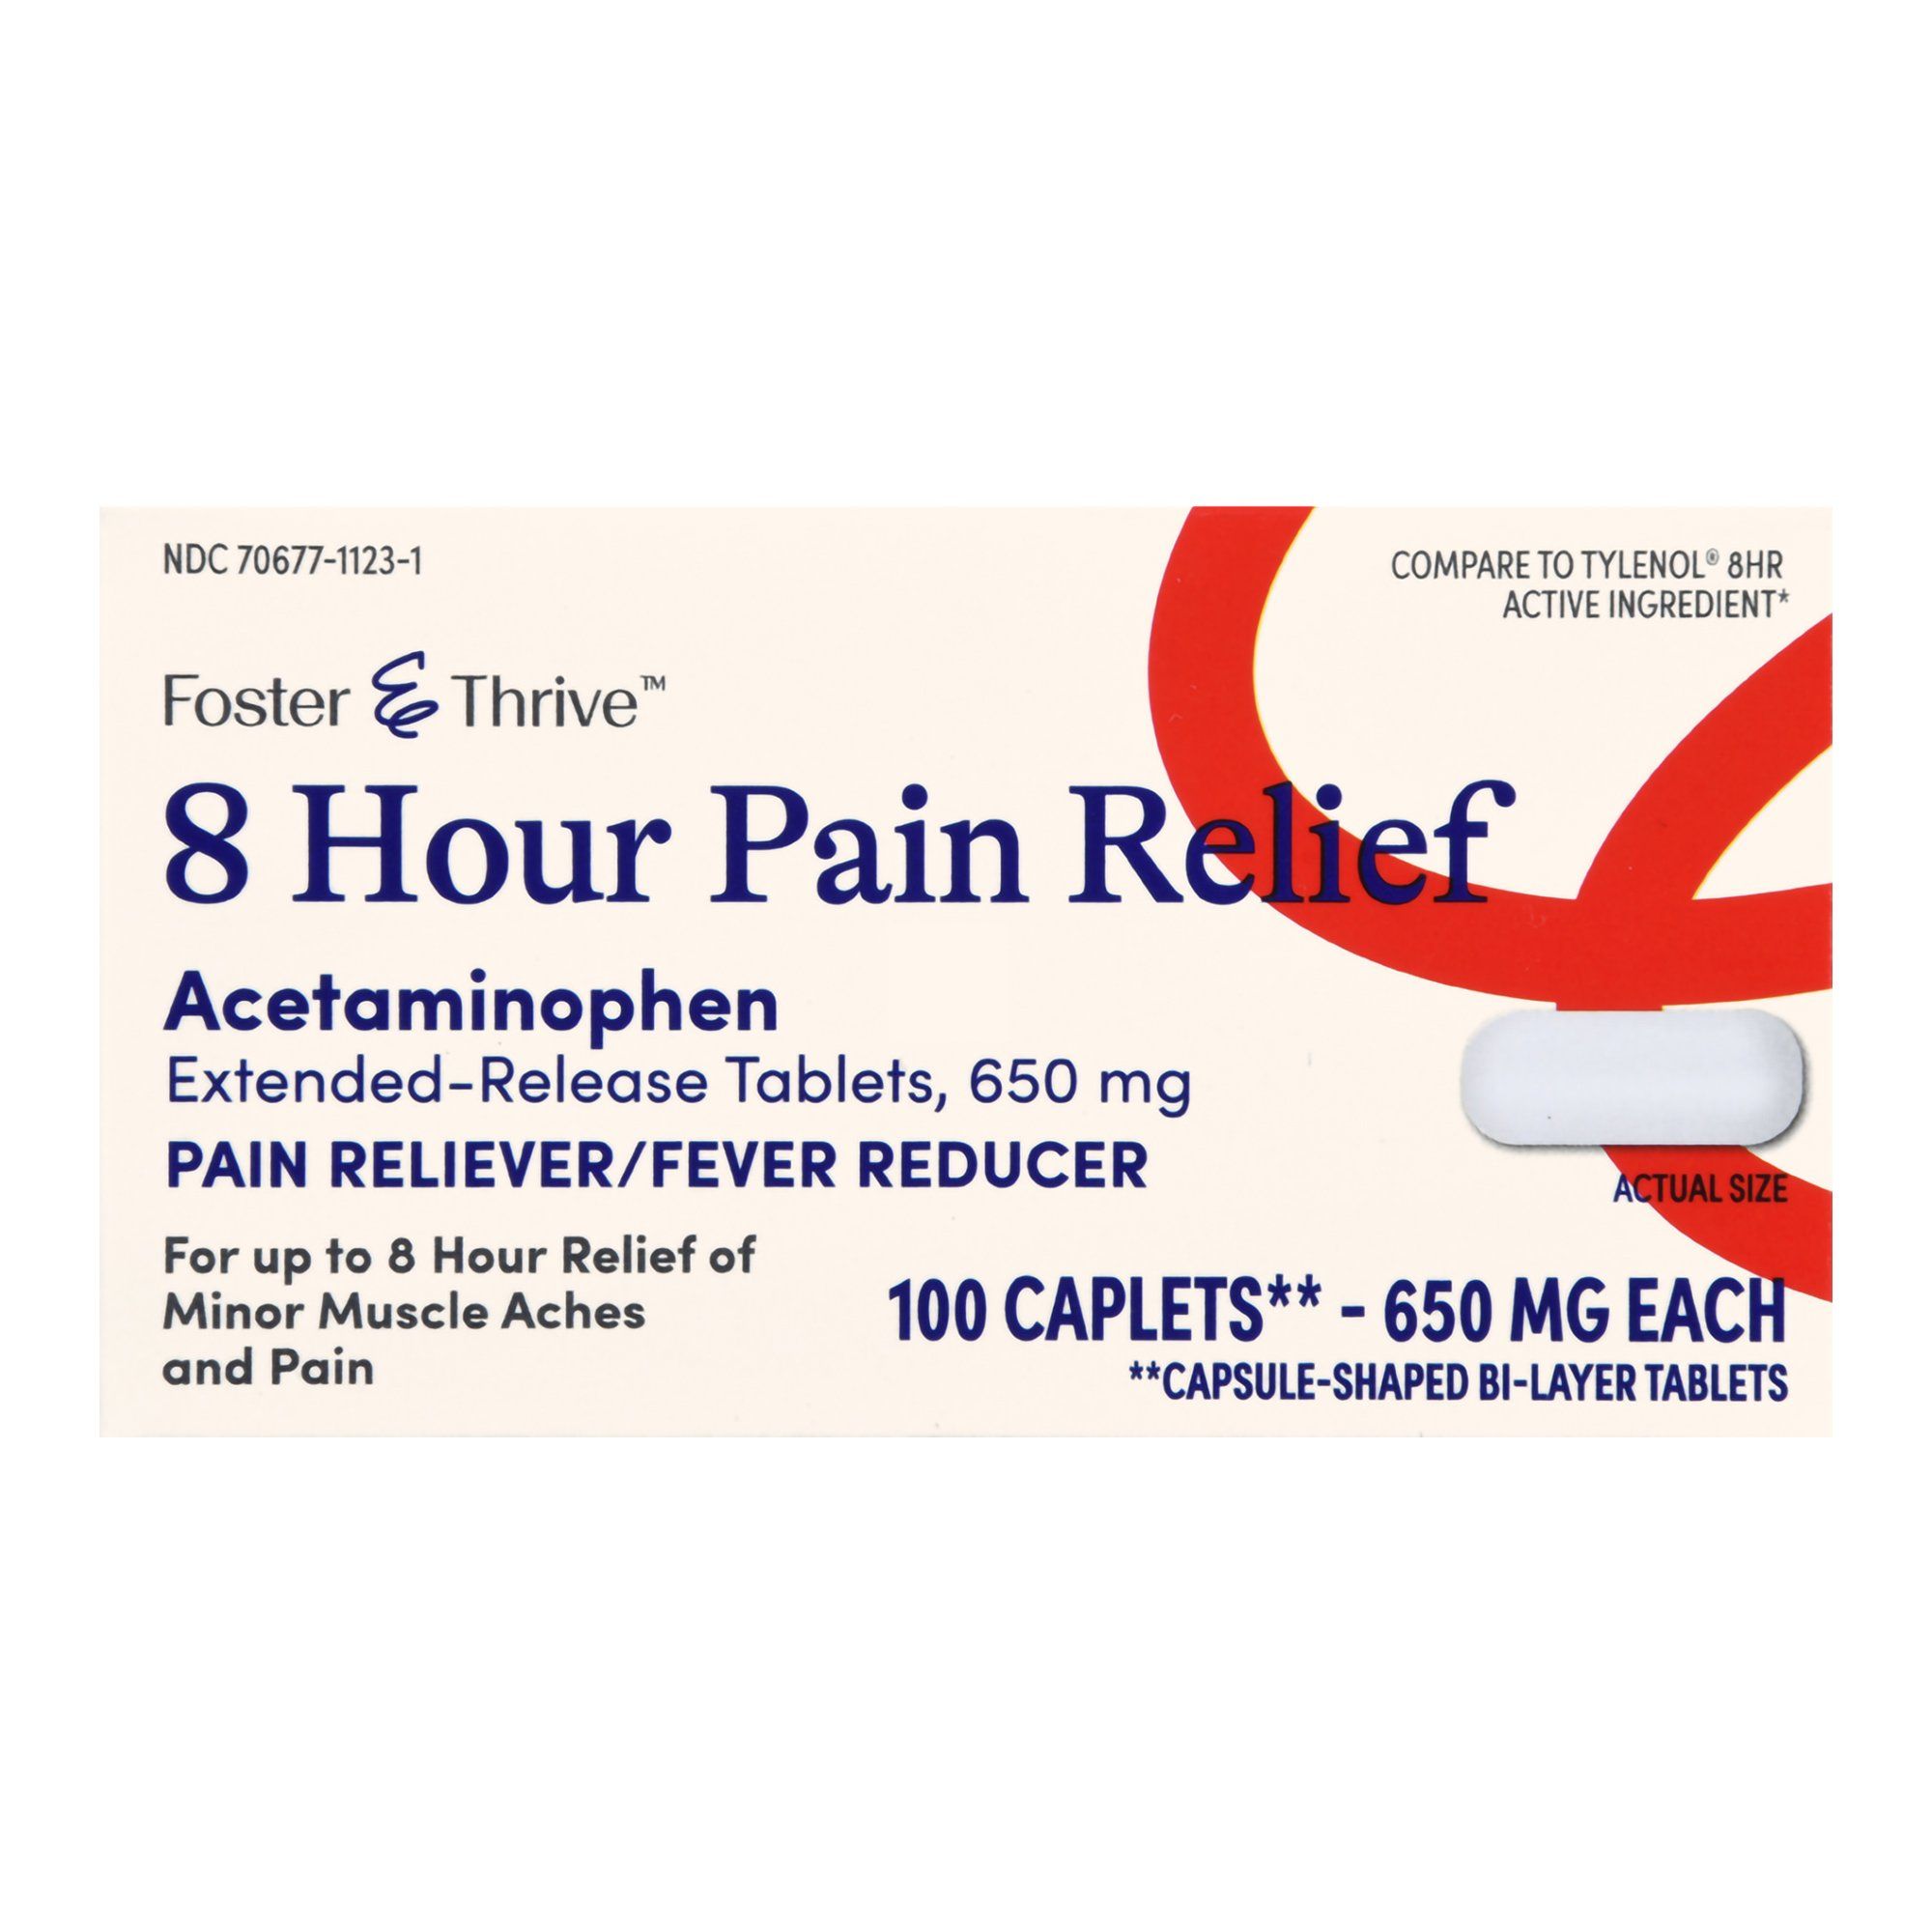 Foster & Thrive 8 Hour Pain Relief Acetaminophen Caplets,  650 mg -  100 ct